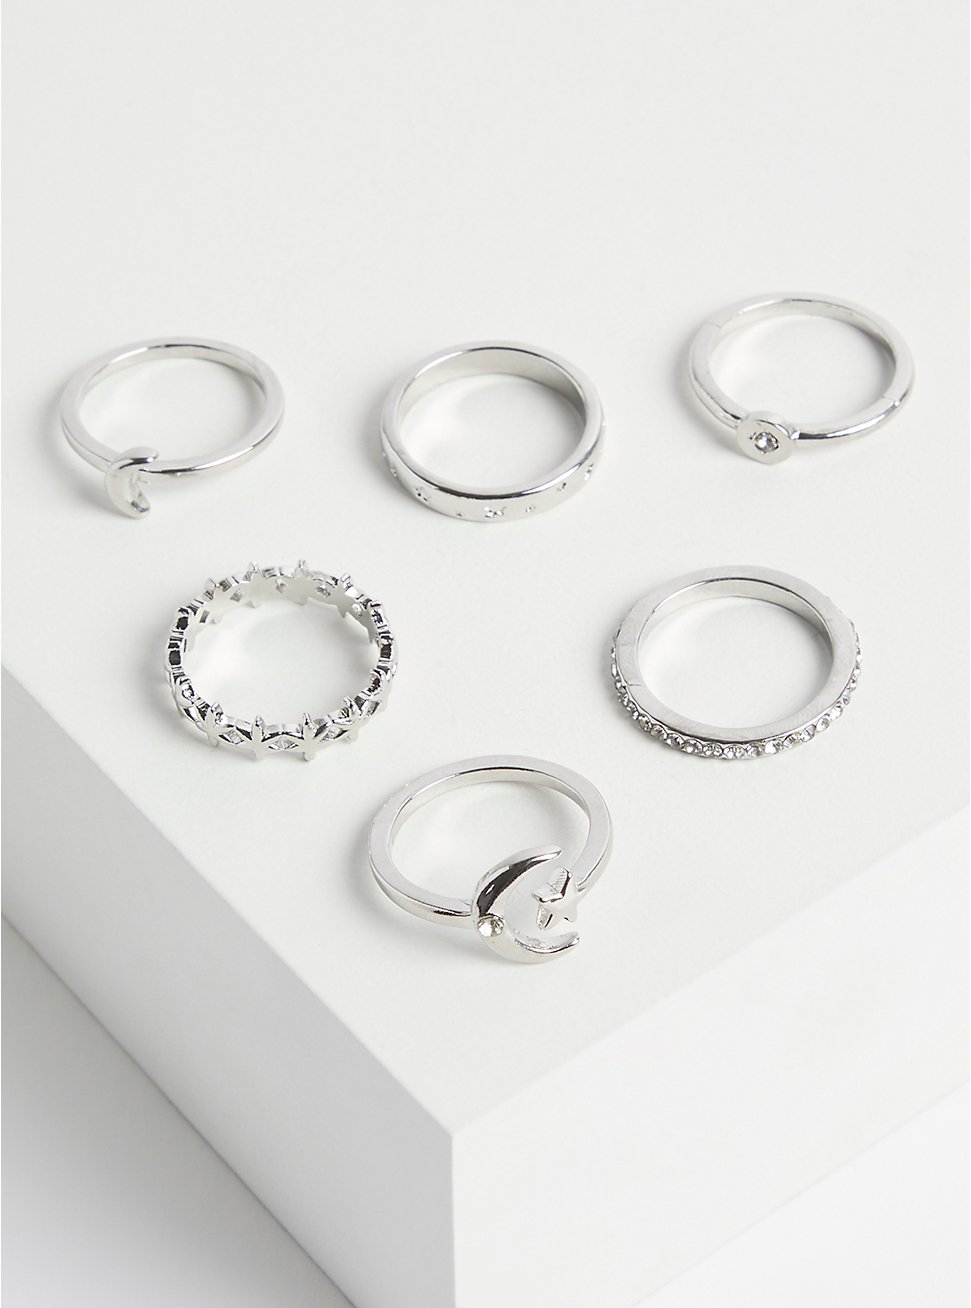 Plus Size Star & Moon Ring Set of 6, SILVER, hi-res